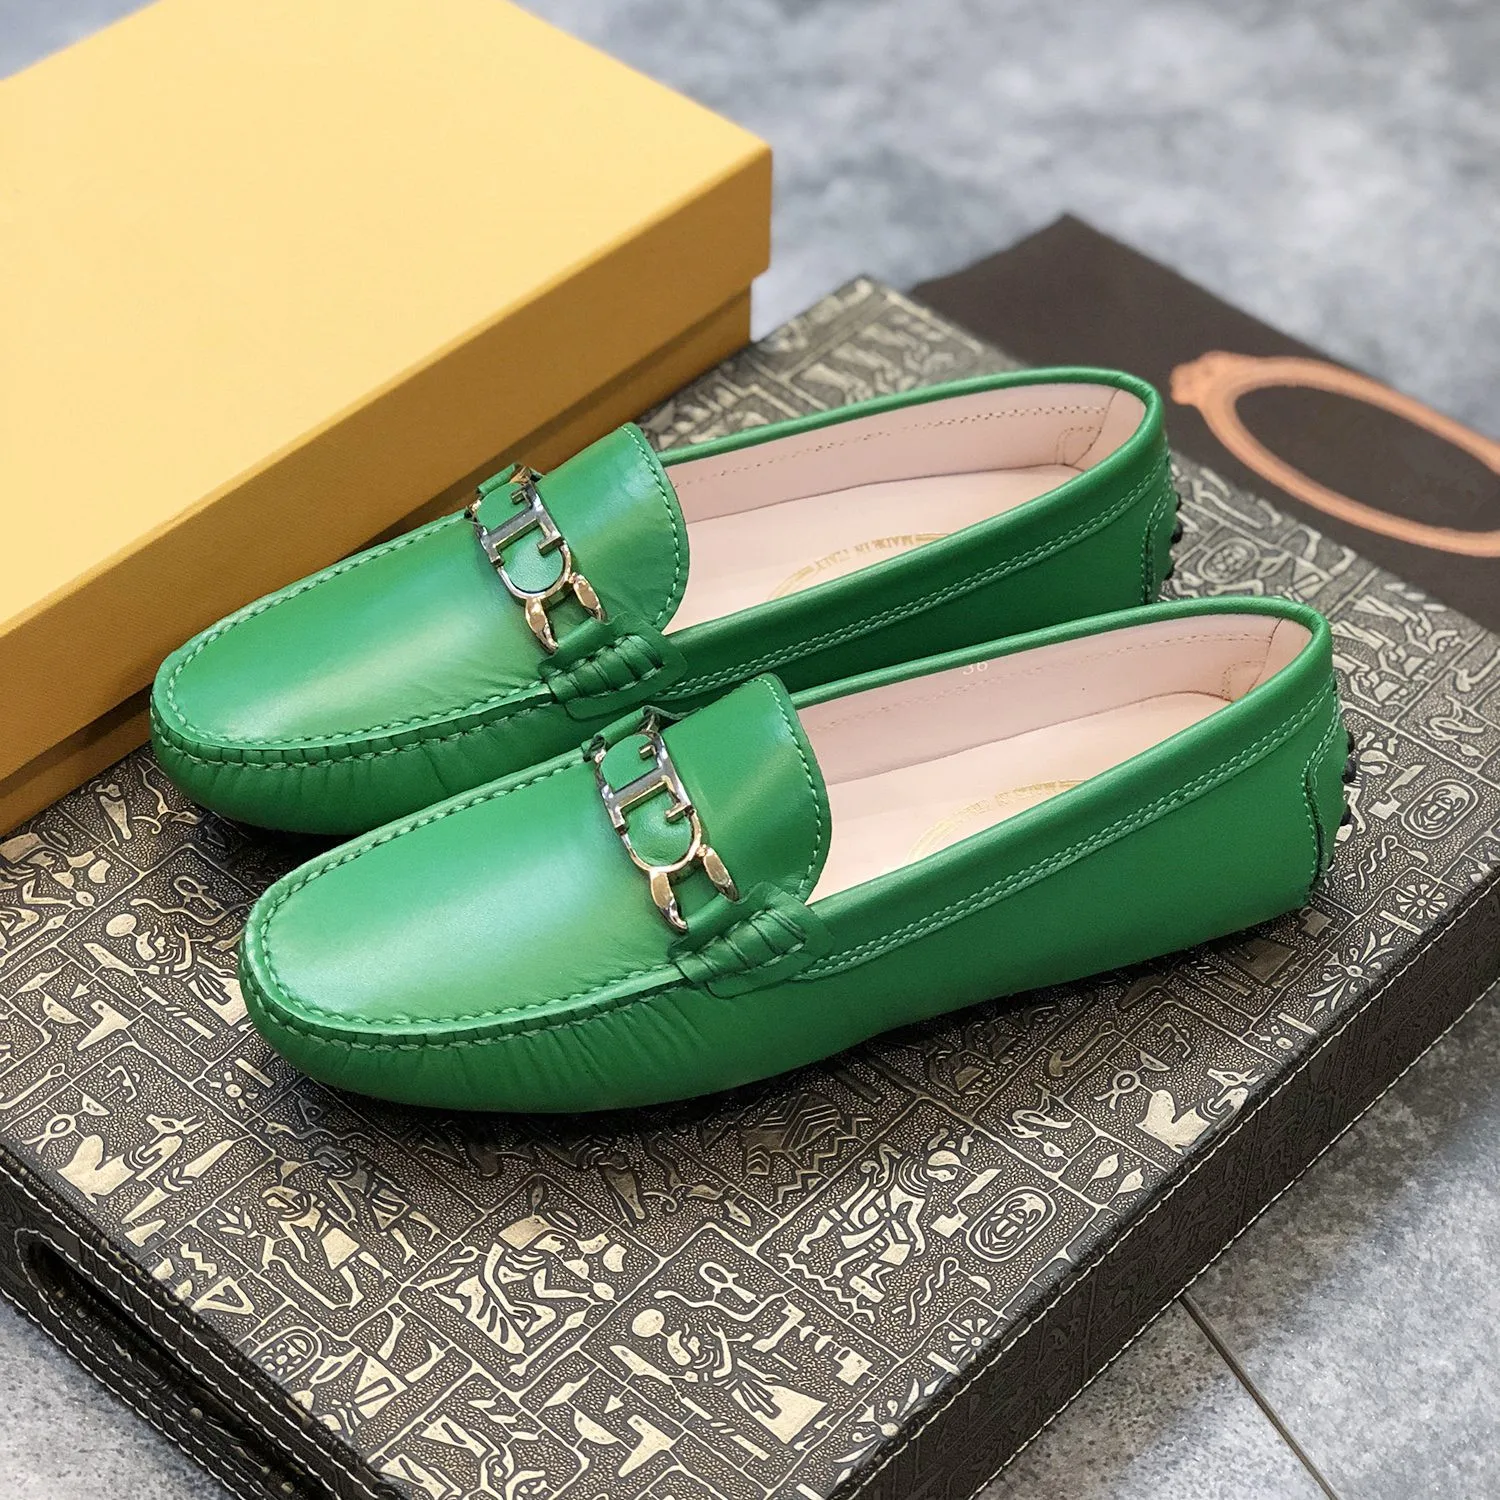 Купи New cowhide flat bottom pea shoes 2022 spring and autumn and summer shallow mouth fashion casual single shoes women's shoes за 3,900 рублей в магазине AliExpress